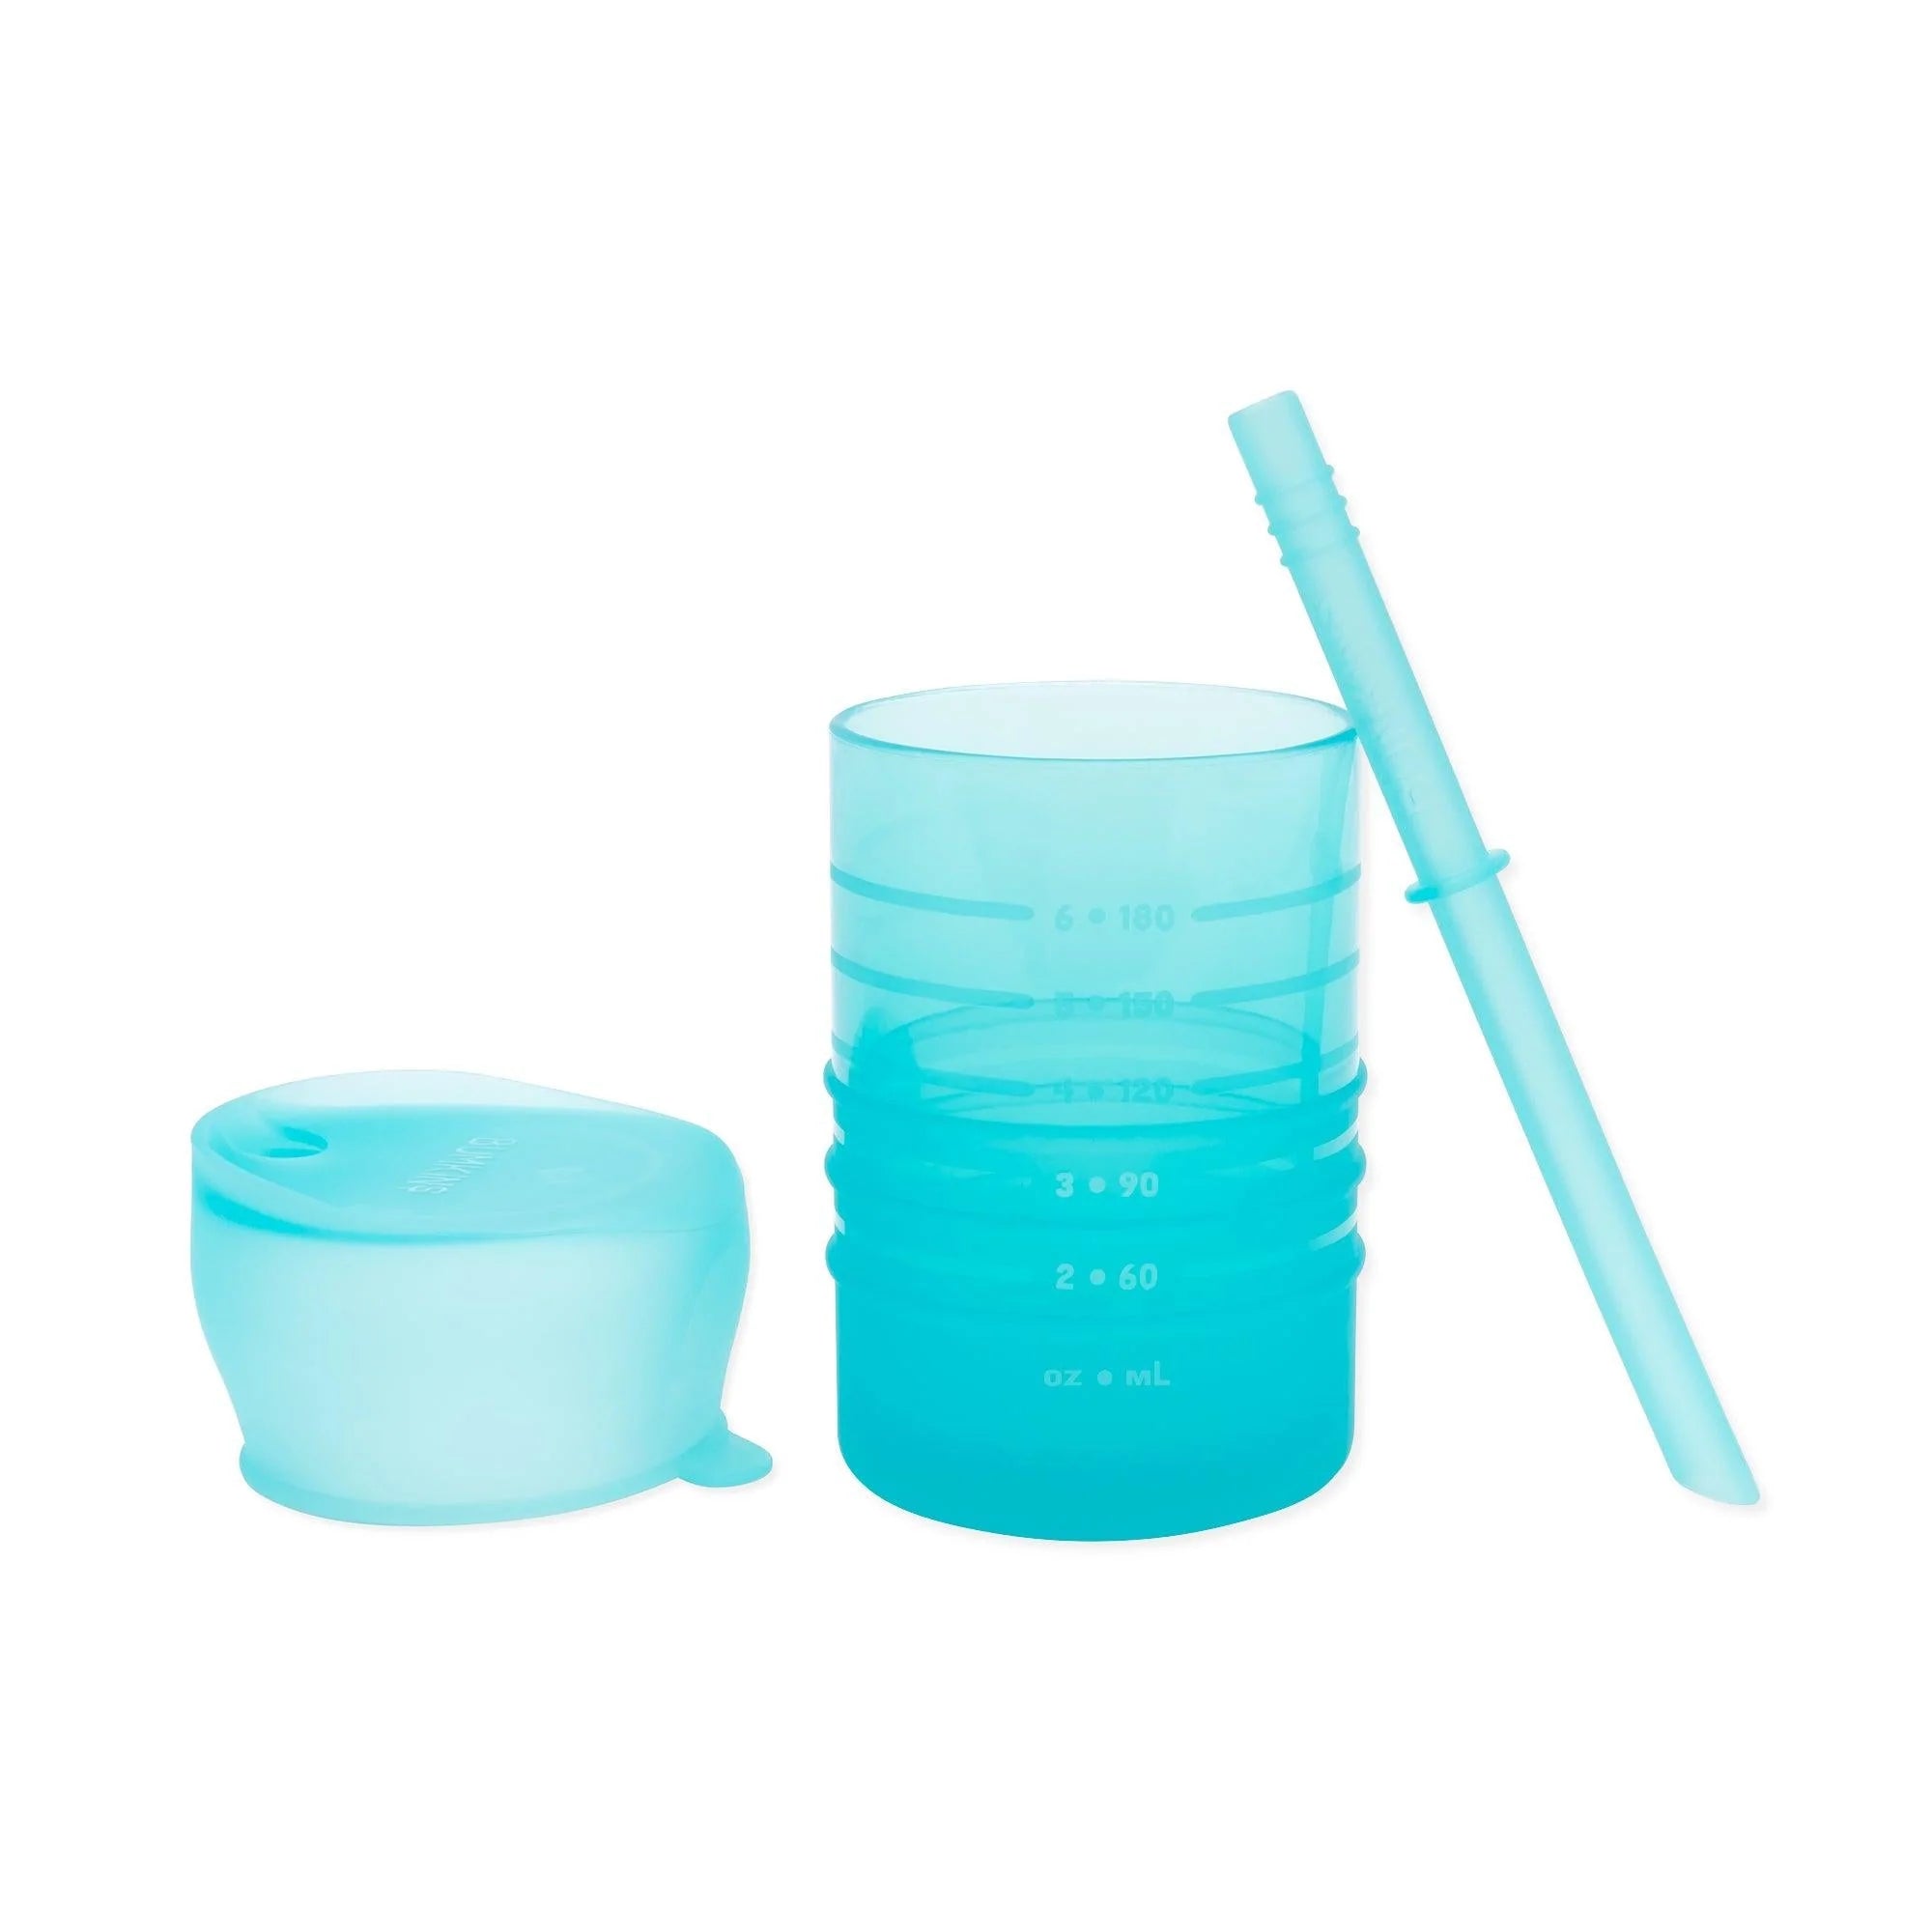 Silicone cup lids blue/green